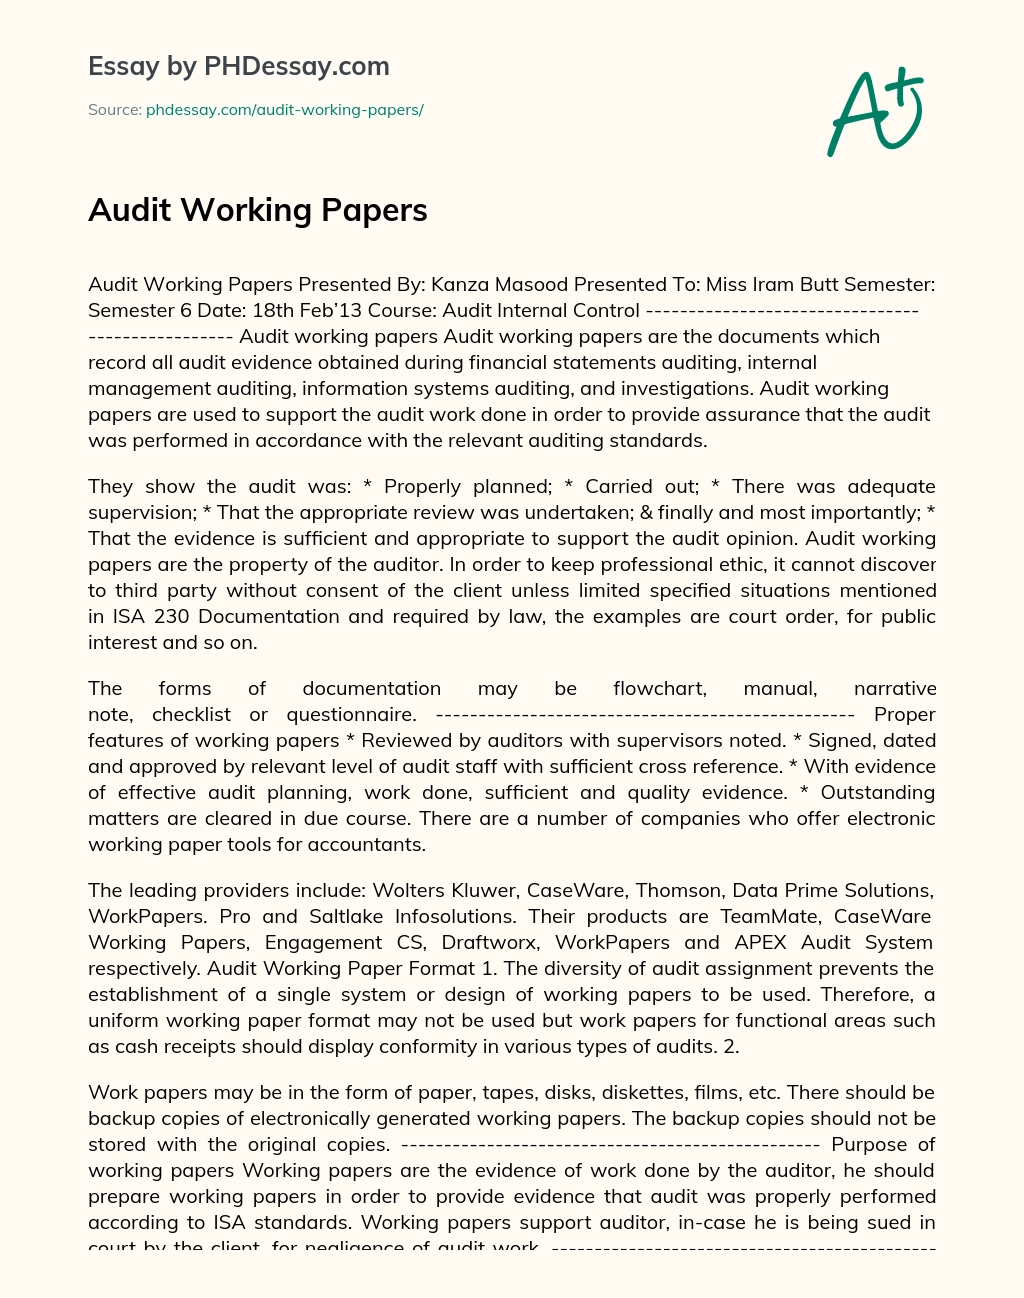 Audit Working Papers essay